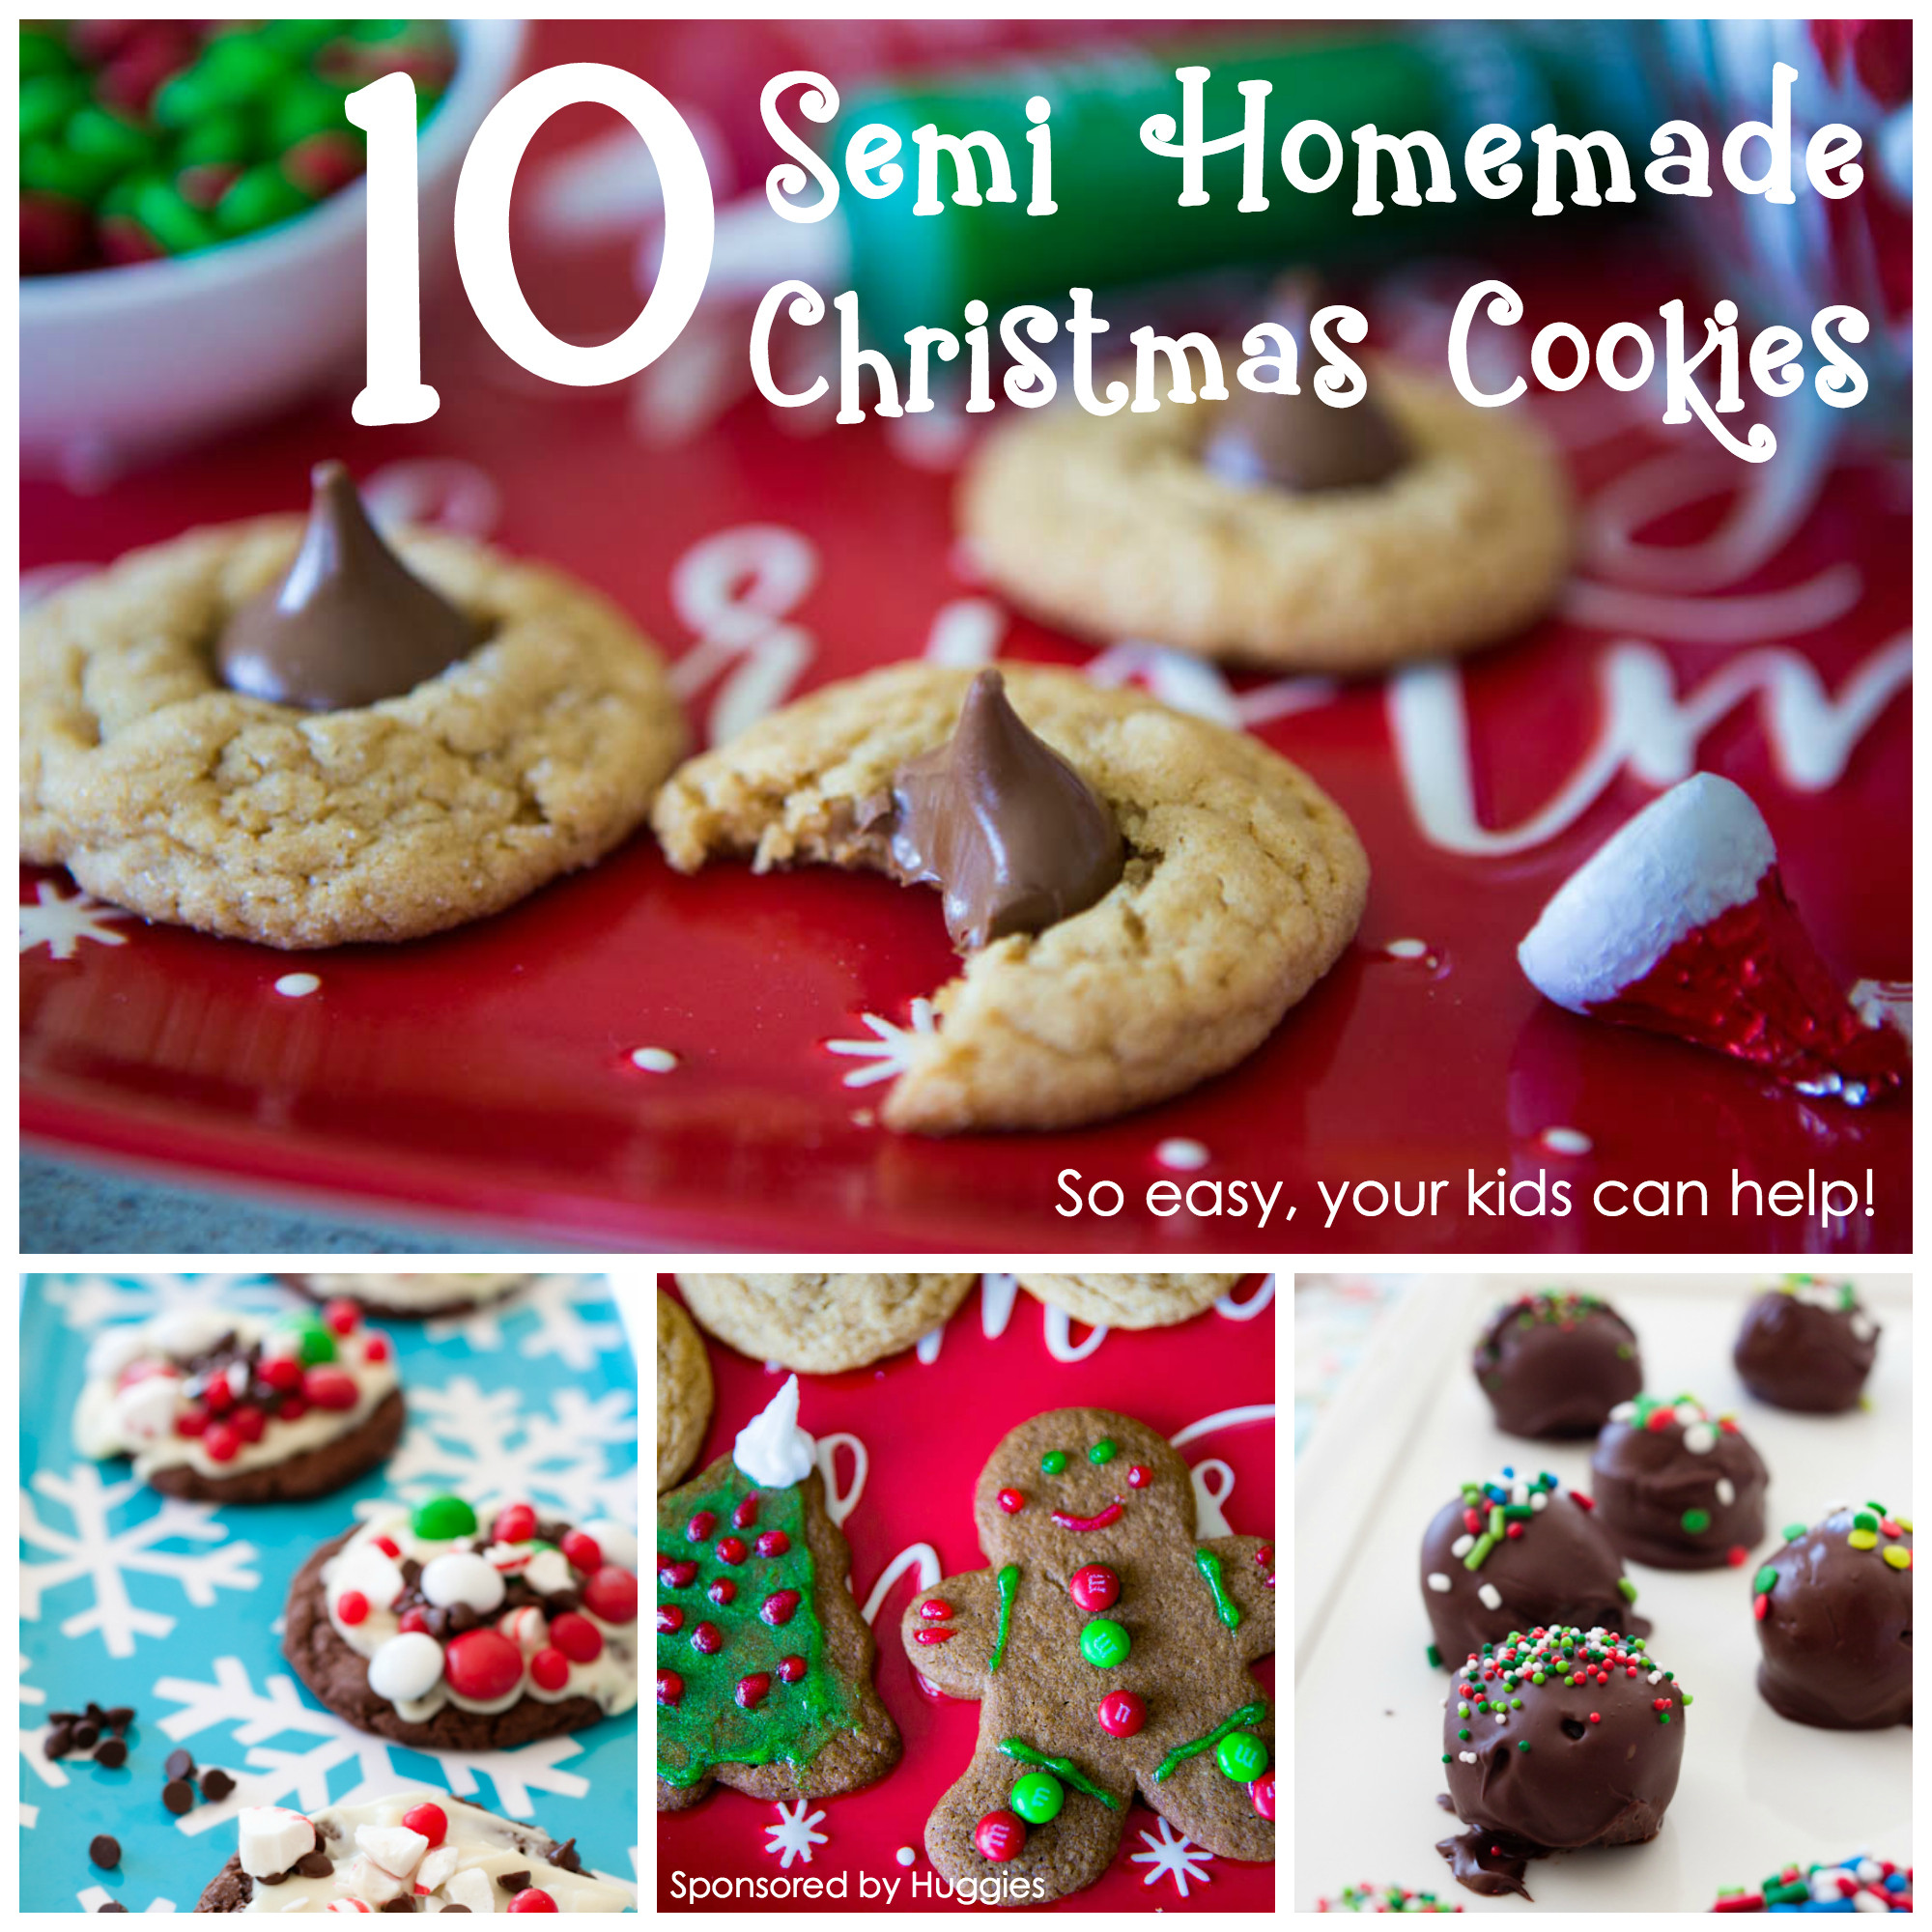 Easy Christmas Cookies For Kids
 10 semi homemade Christmas cookies that will save your sanity